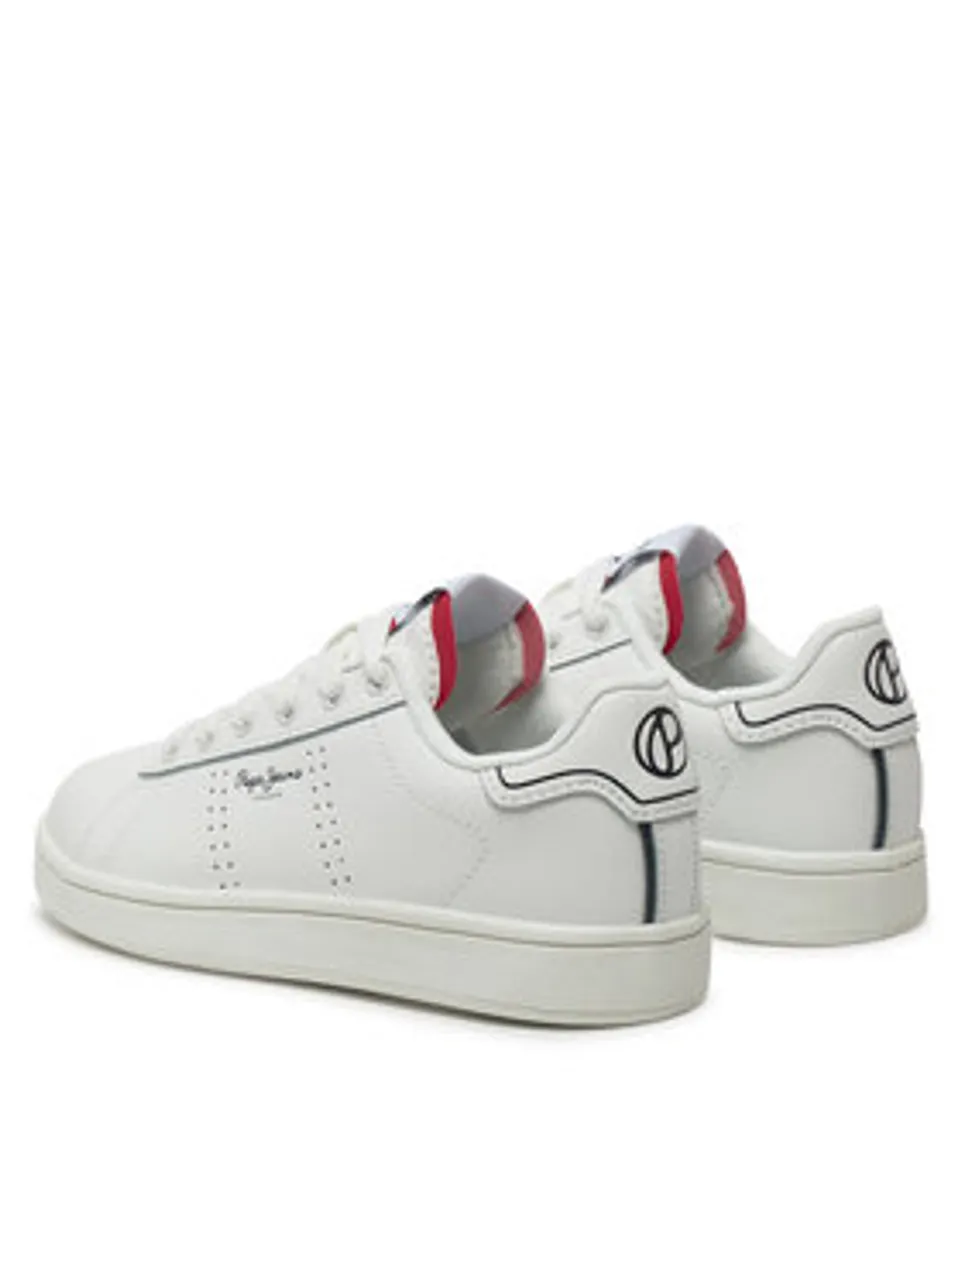 Pepe Jeans Sneakers Player Basic B PBS00001 Weiß